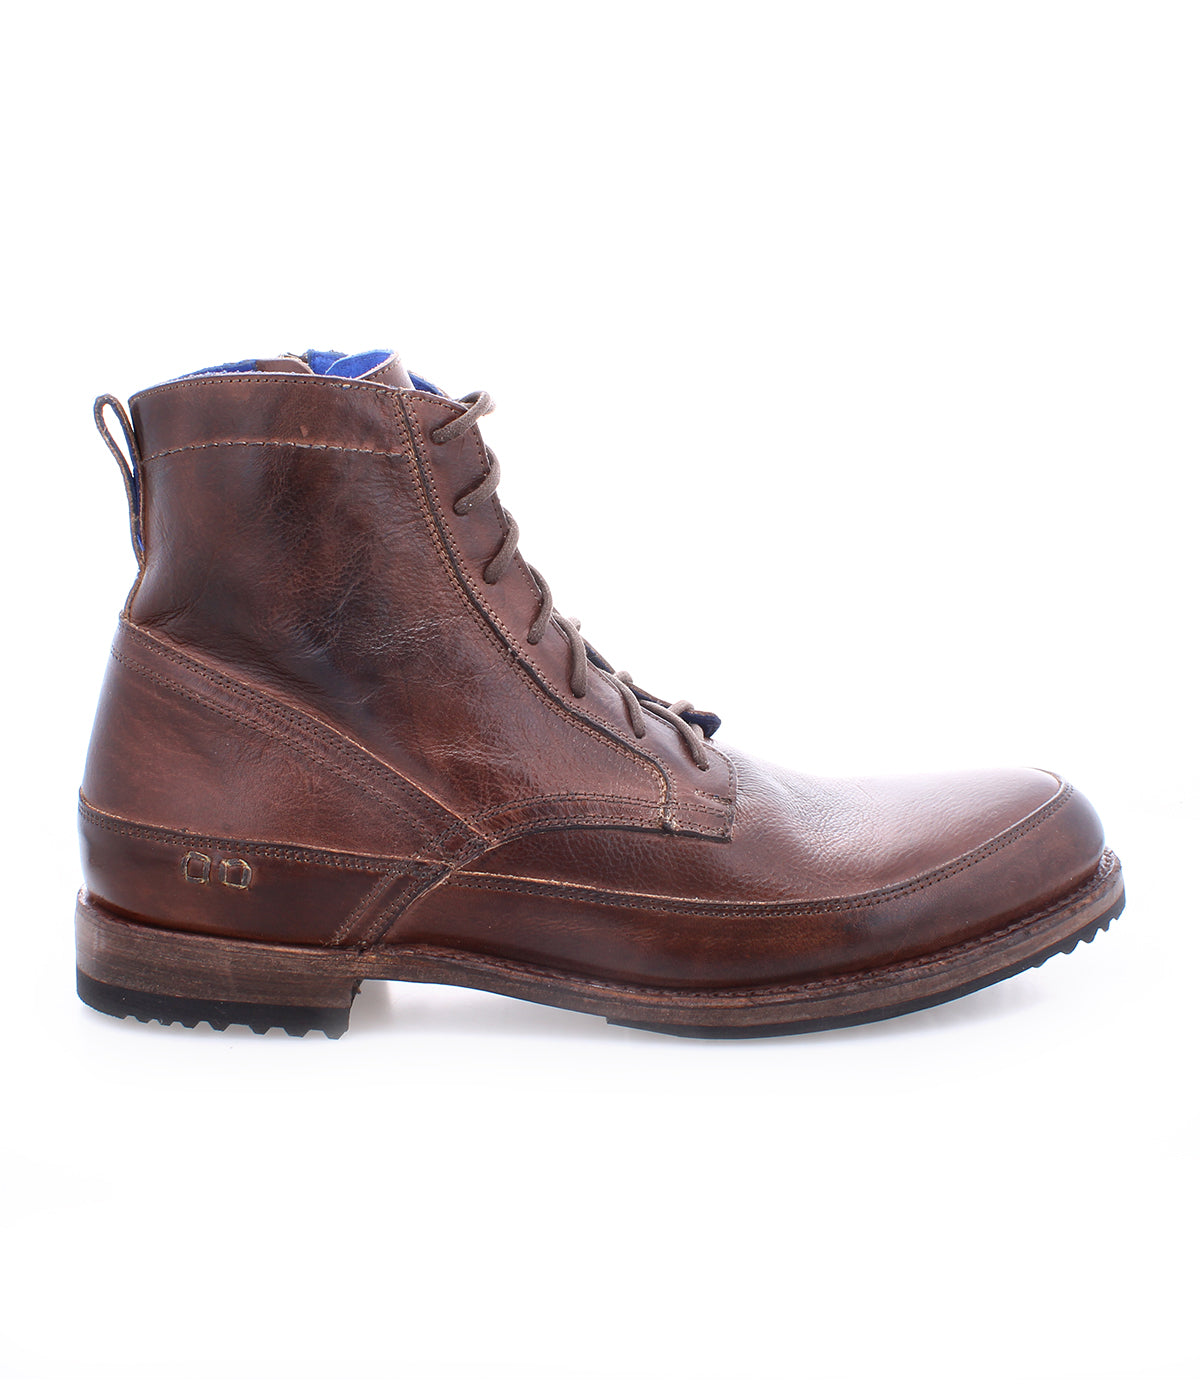 A single Bed Stu men's Spiker Teak Rustic Boot with a rugged sole, displayed against a white background.